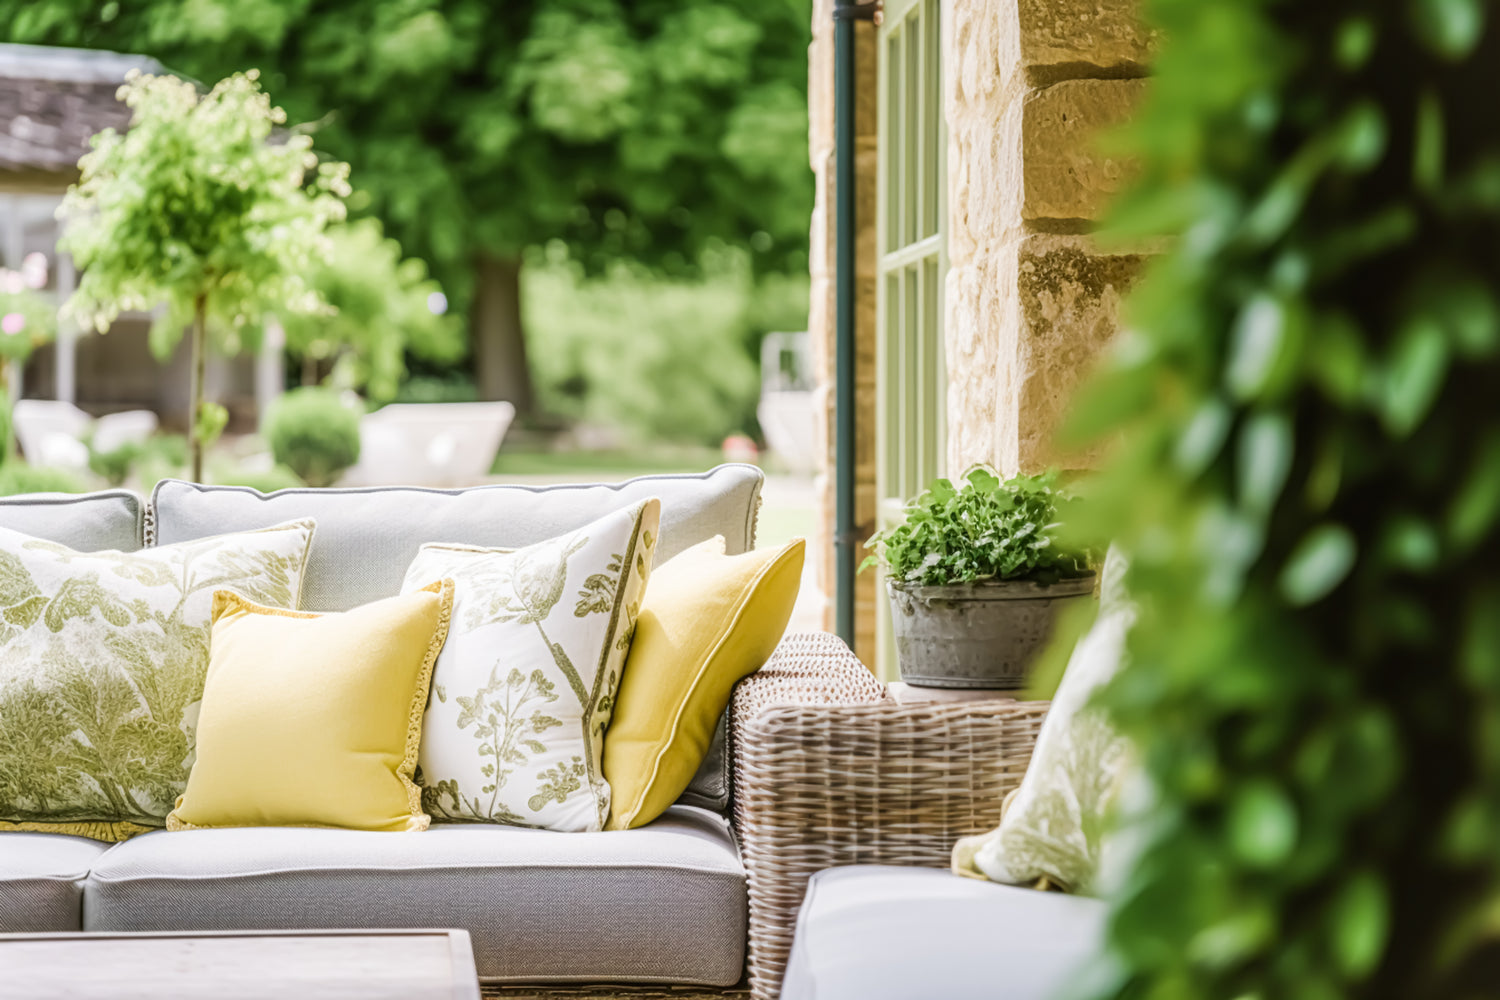 A patio with wicker furniture and yellow pillows.